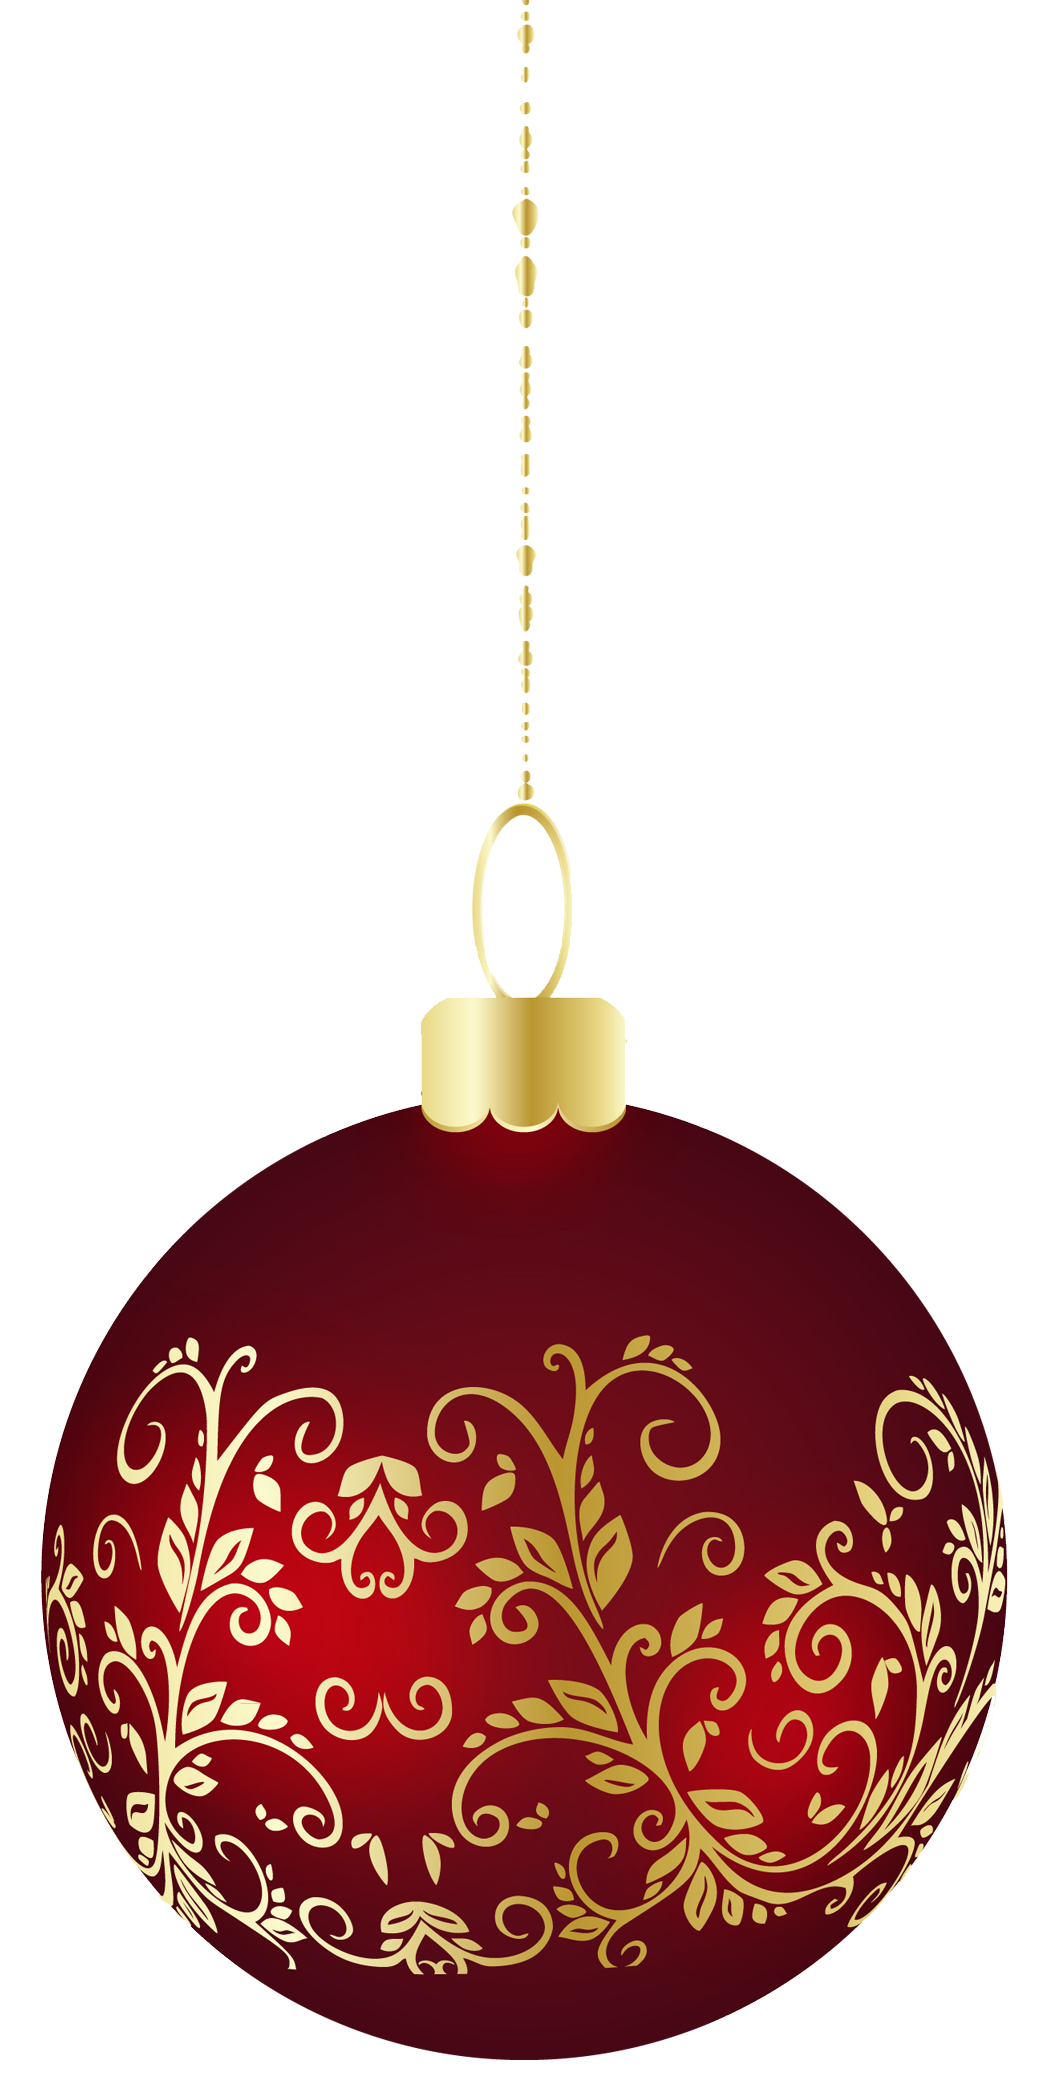 Transparent Red Snowy Christmas Ball Ornament Clipart.